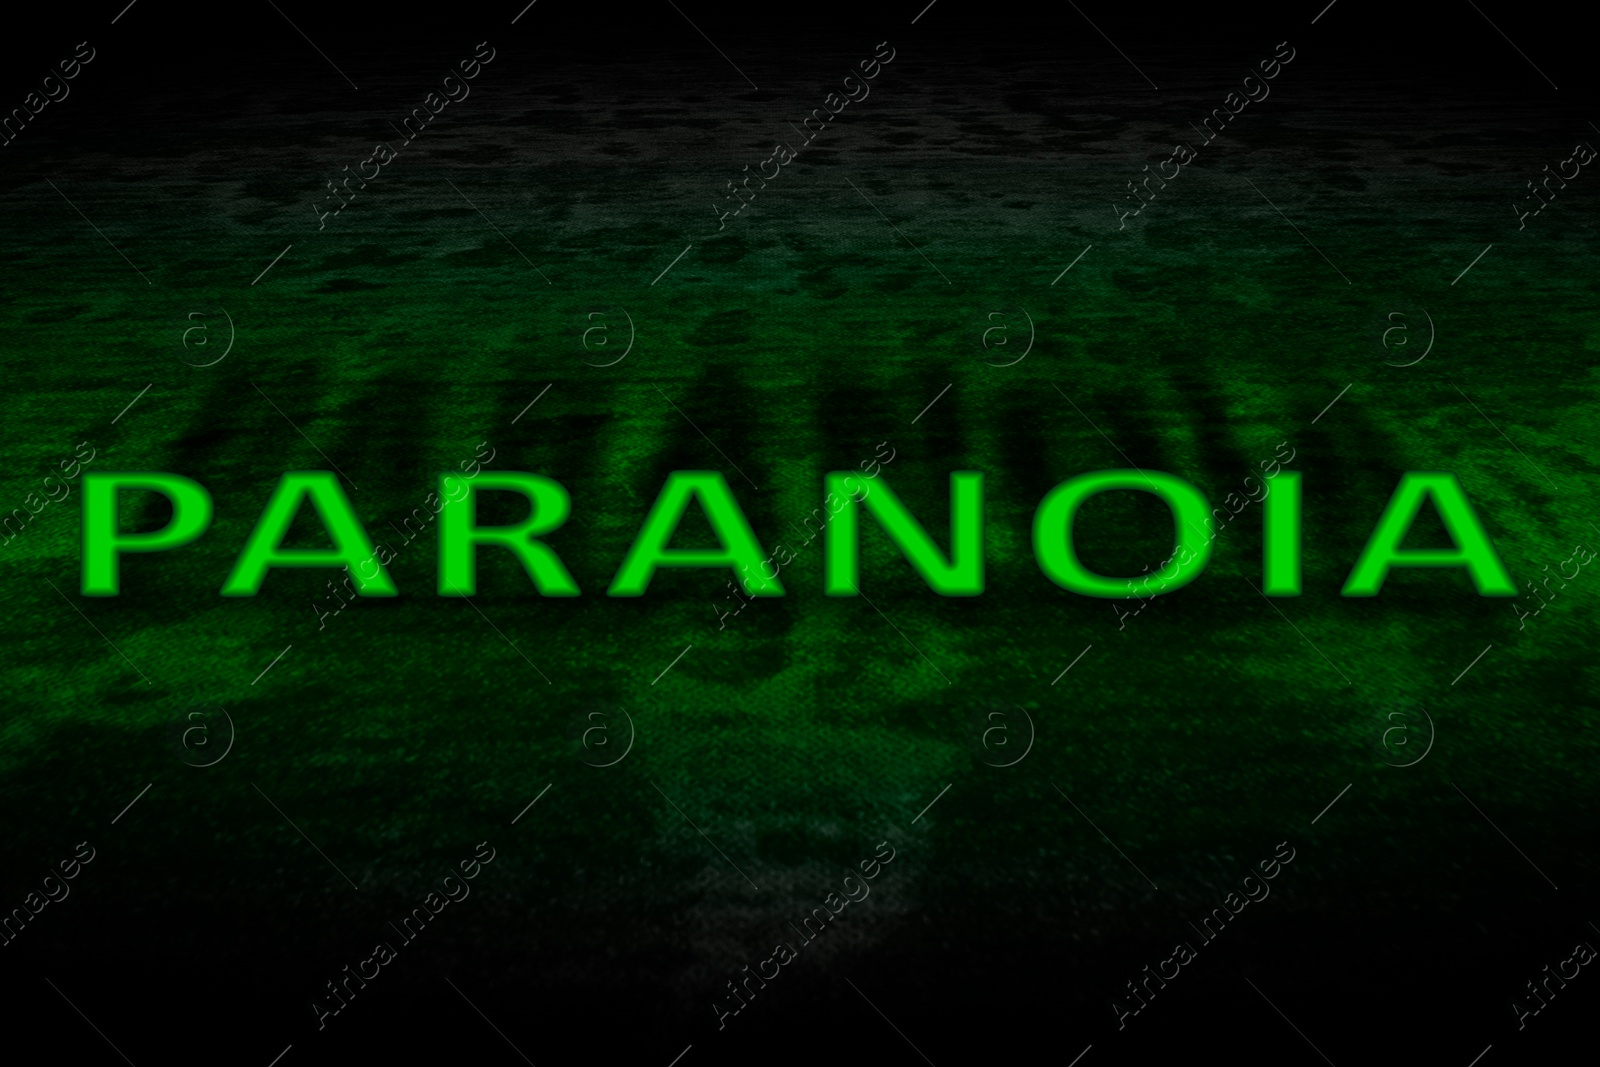 Image of Mental disorder. Bright word Paranoia on dark surface, toned in green